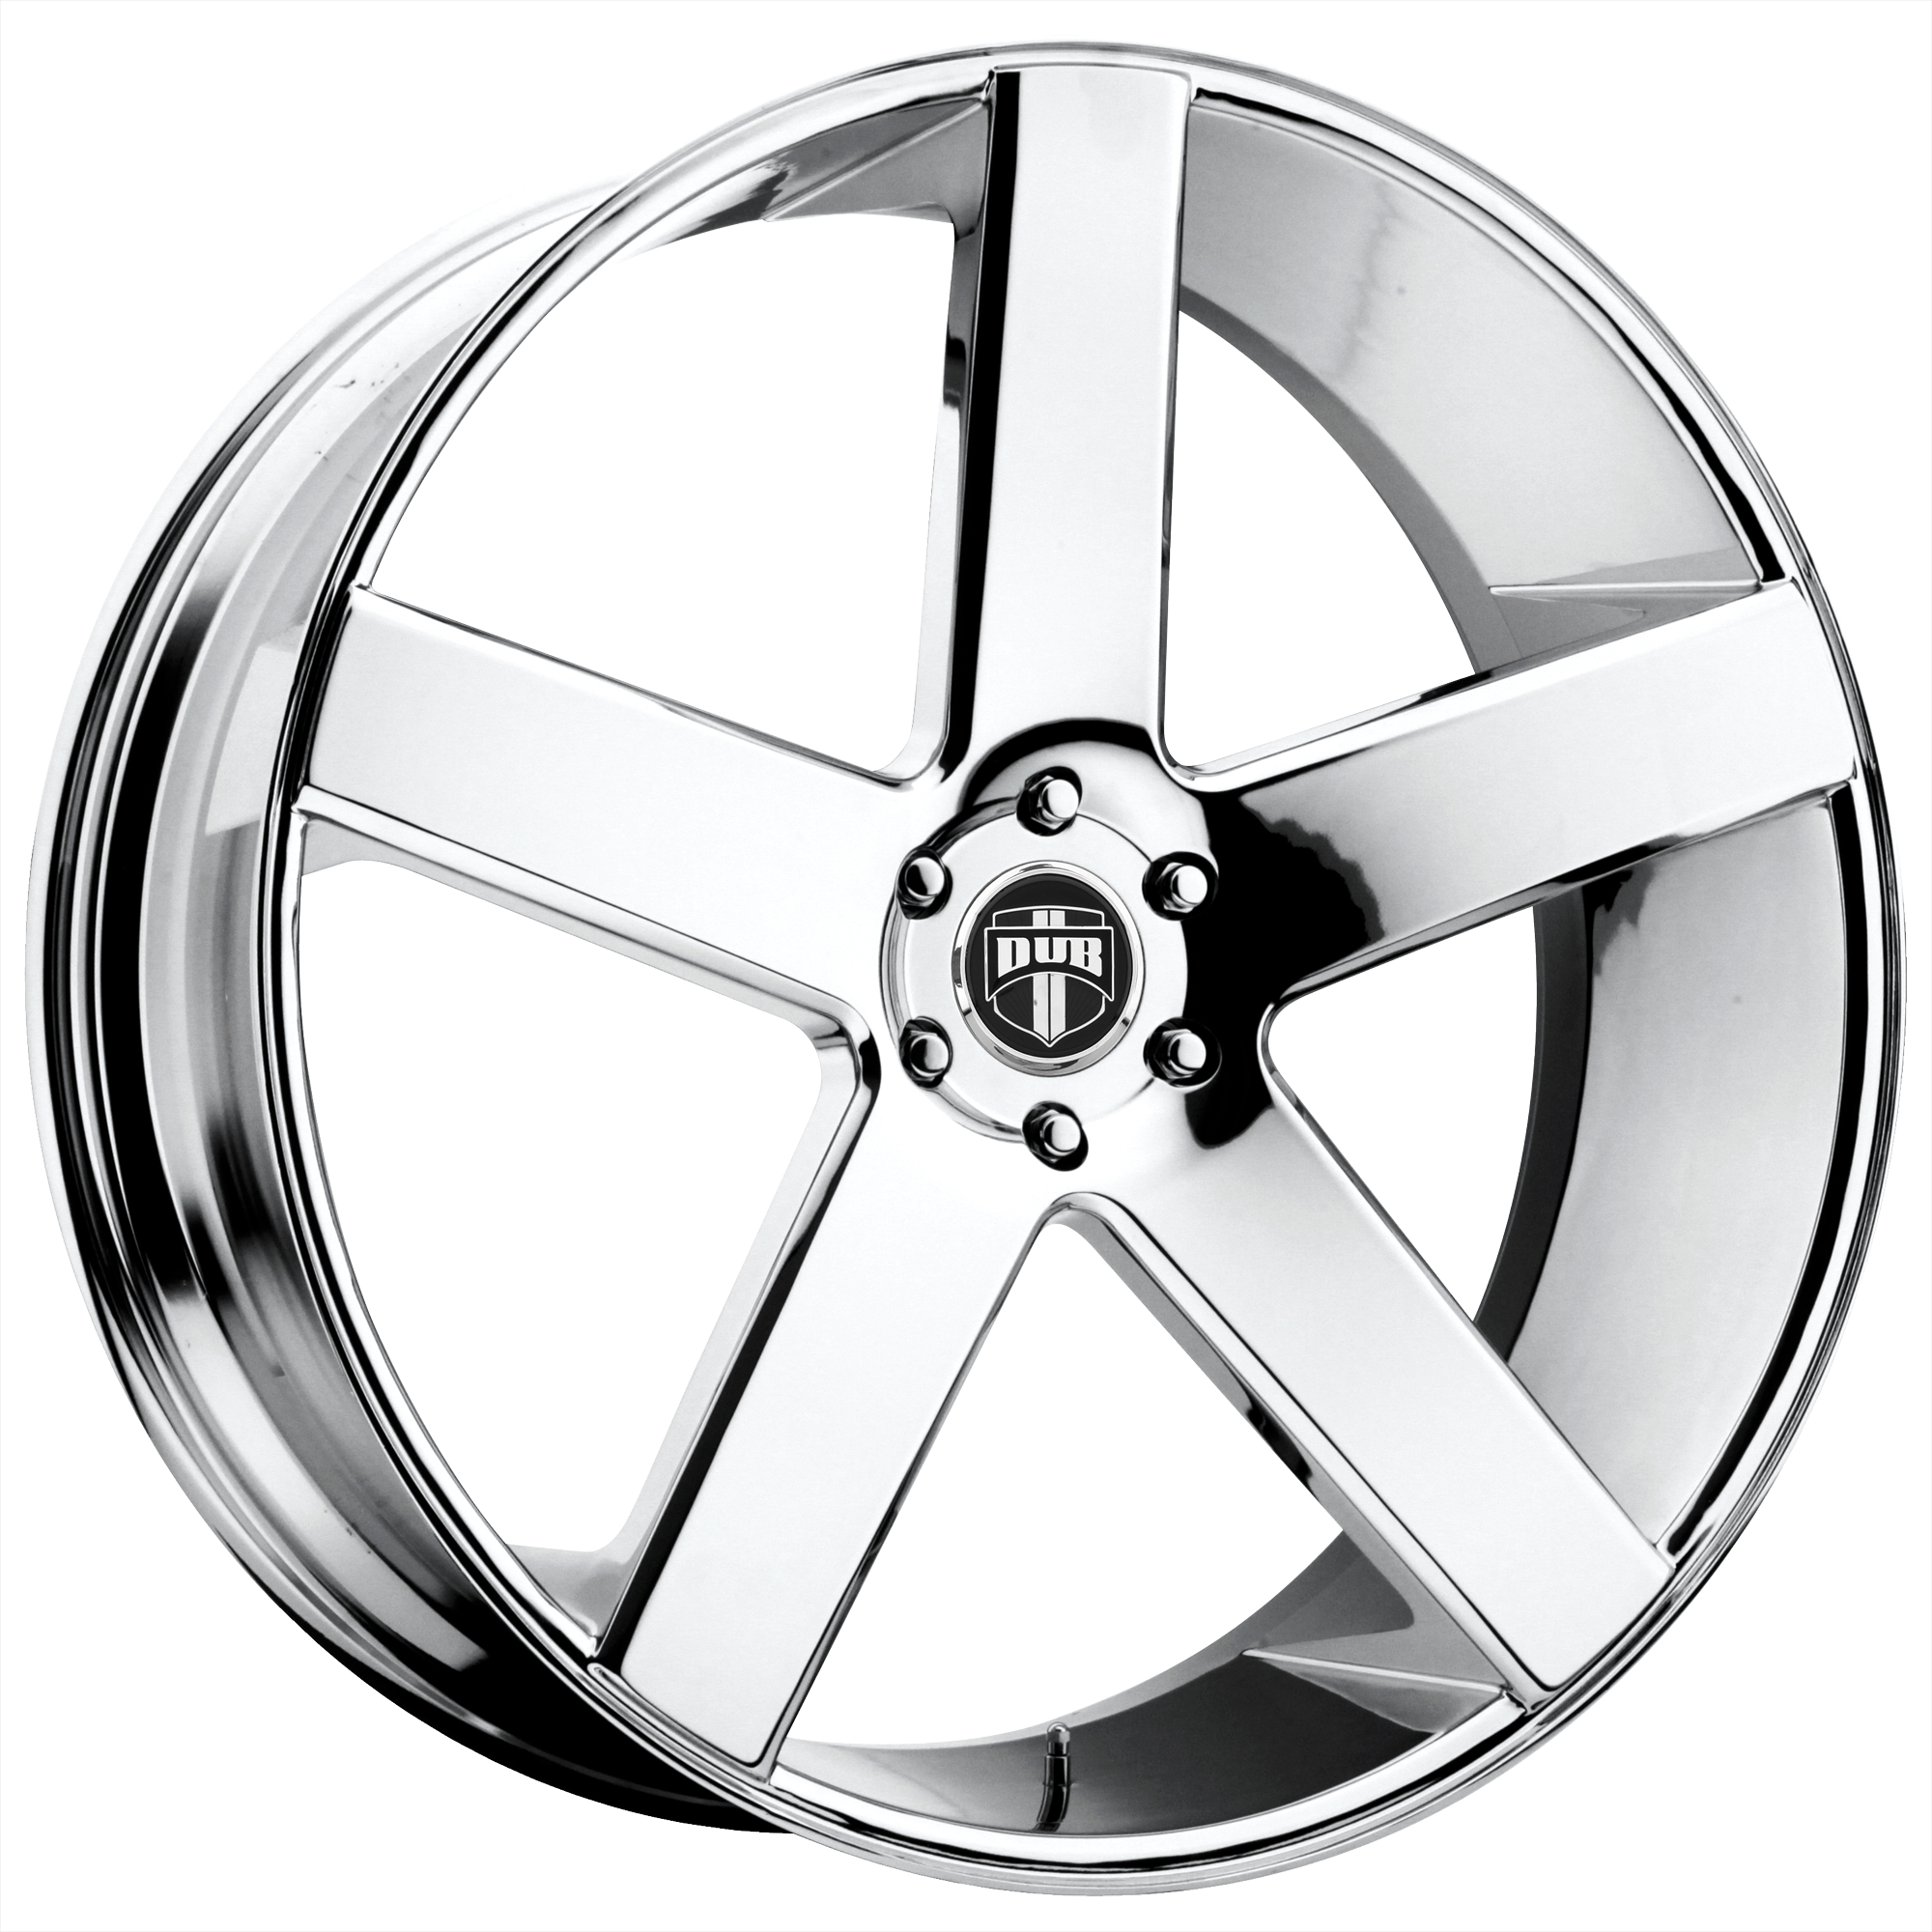 BALLER 26x9 5x120.00 CHROME PLATED (15 mm) - Tires and Engine Performance